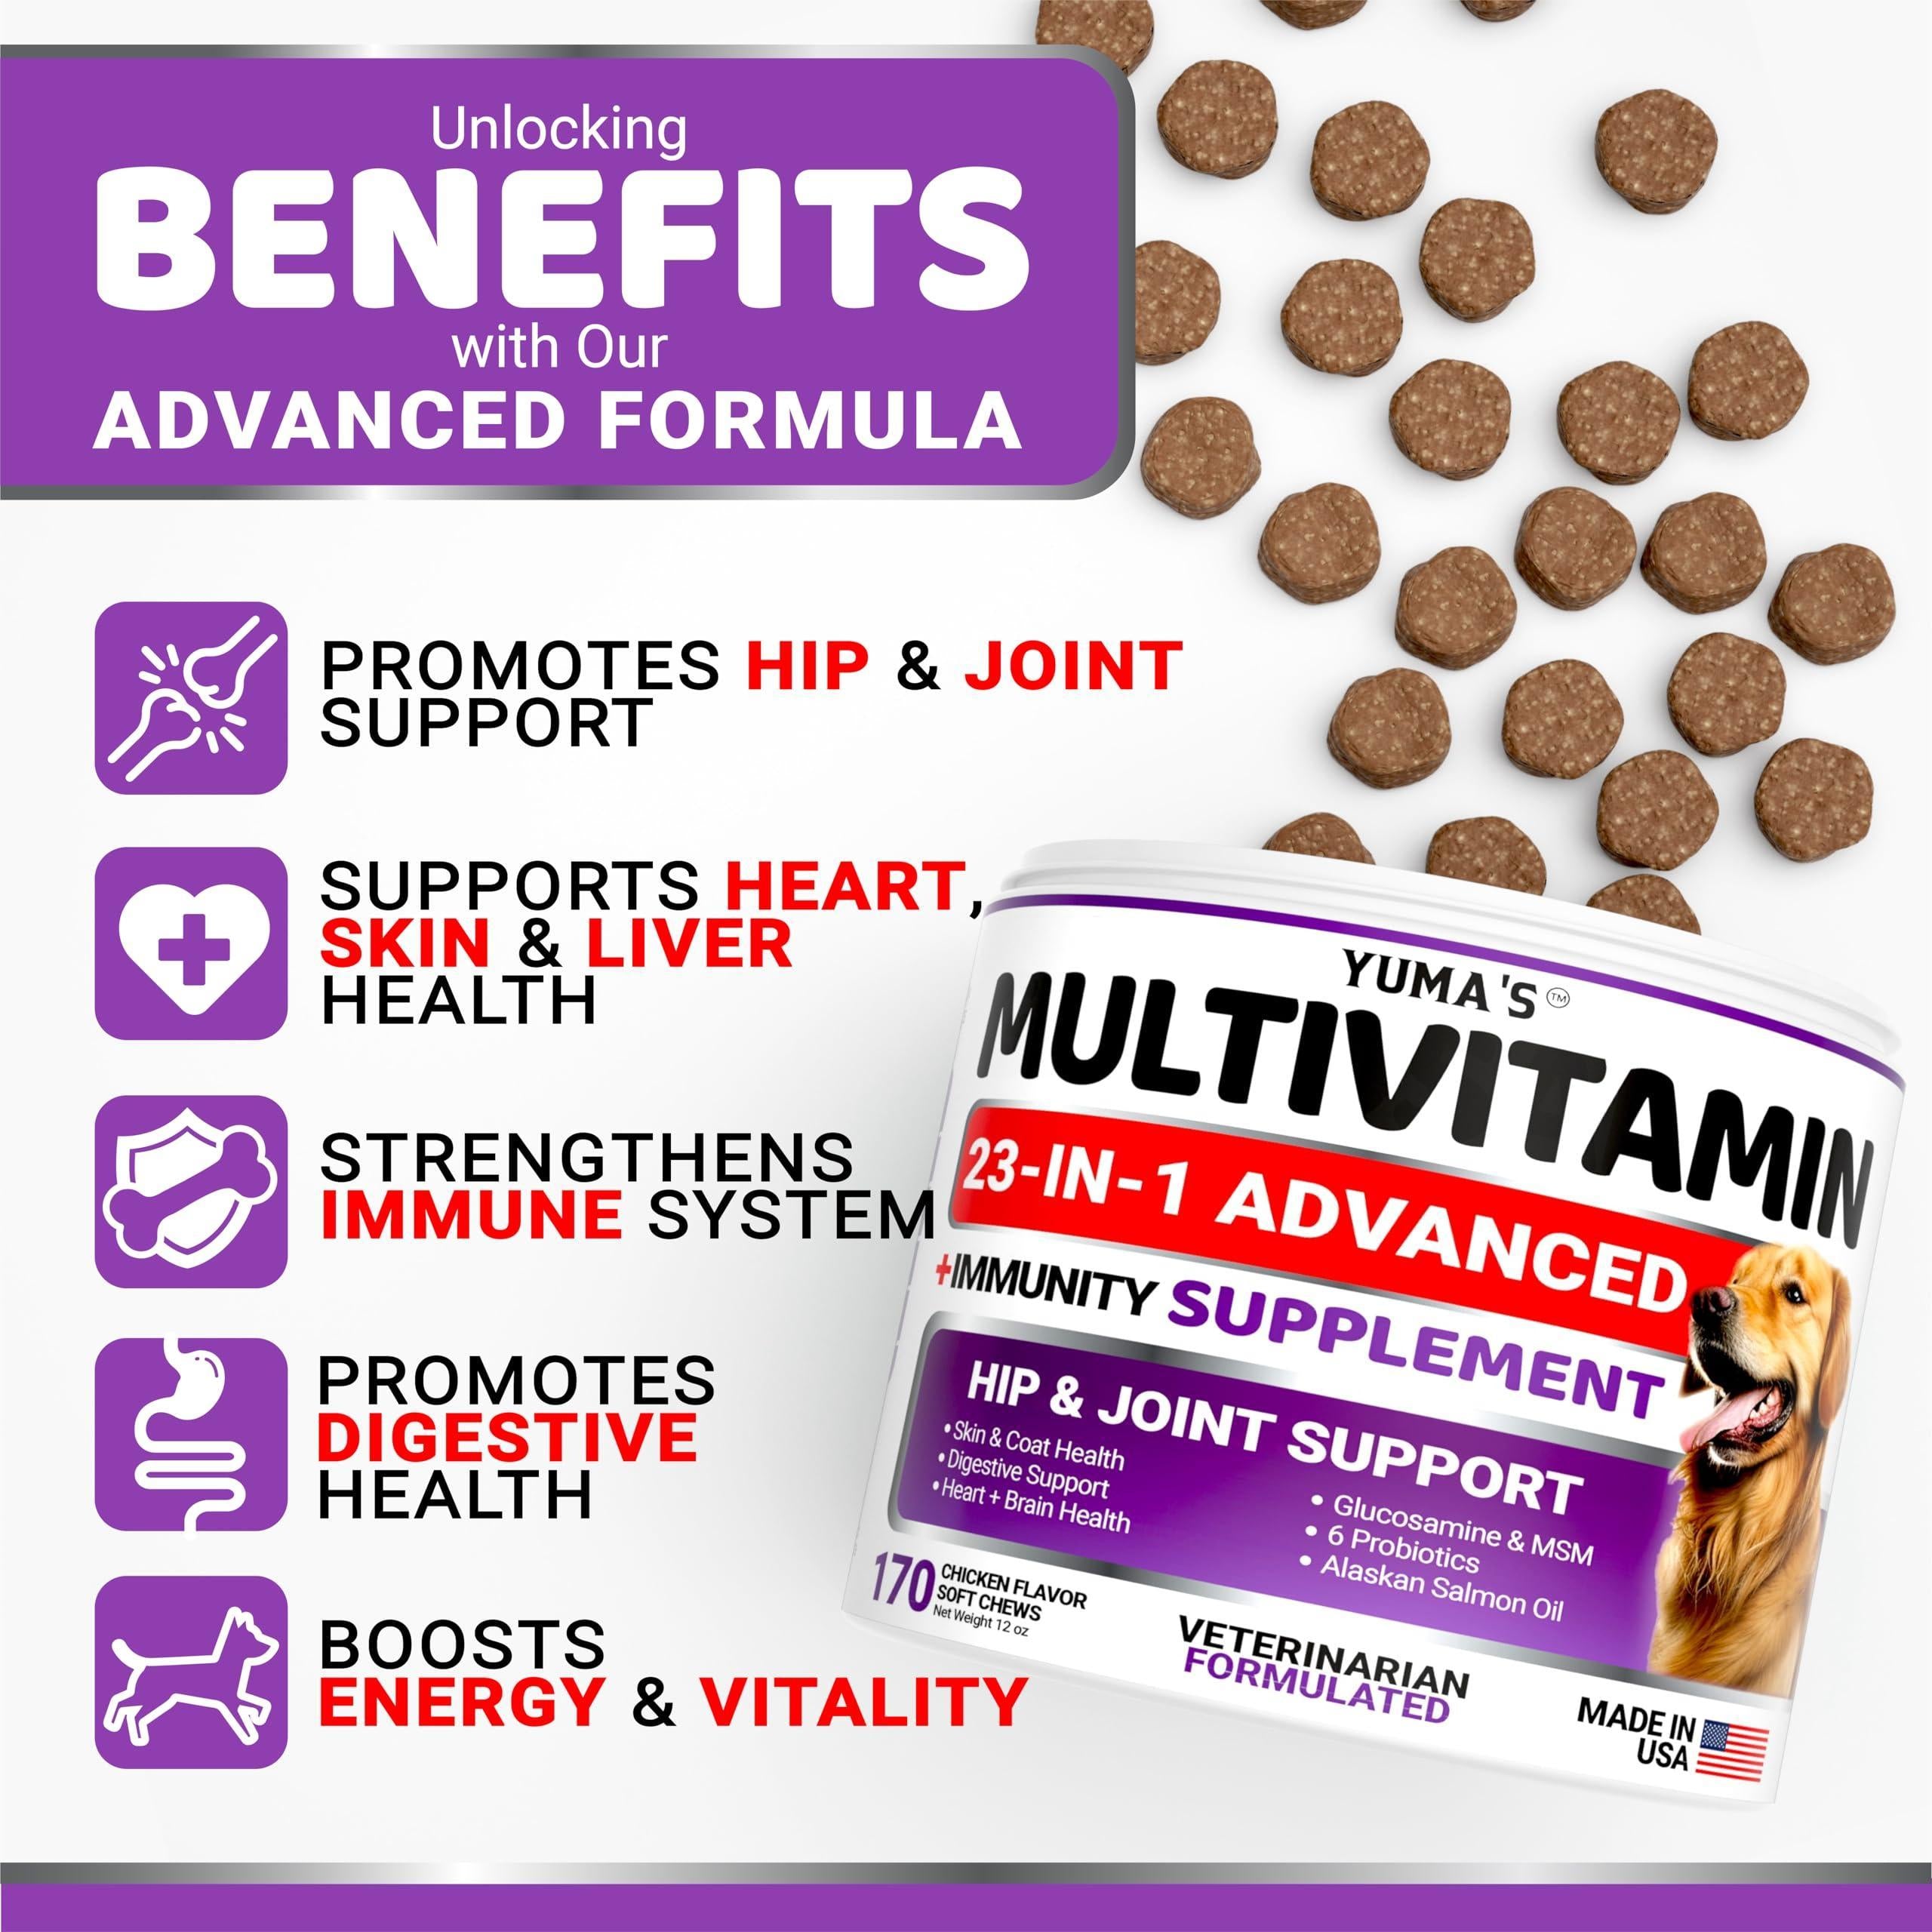 Dog Multivitamin Chewable with Glucosamine   Dog Vitamins and Supplements   170 Treats   Senior & Puppy Multivitamin for Dogs   Hip & Joint Support   Immune Health Skin Heart Digestion Probiotics